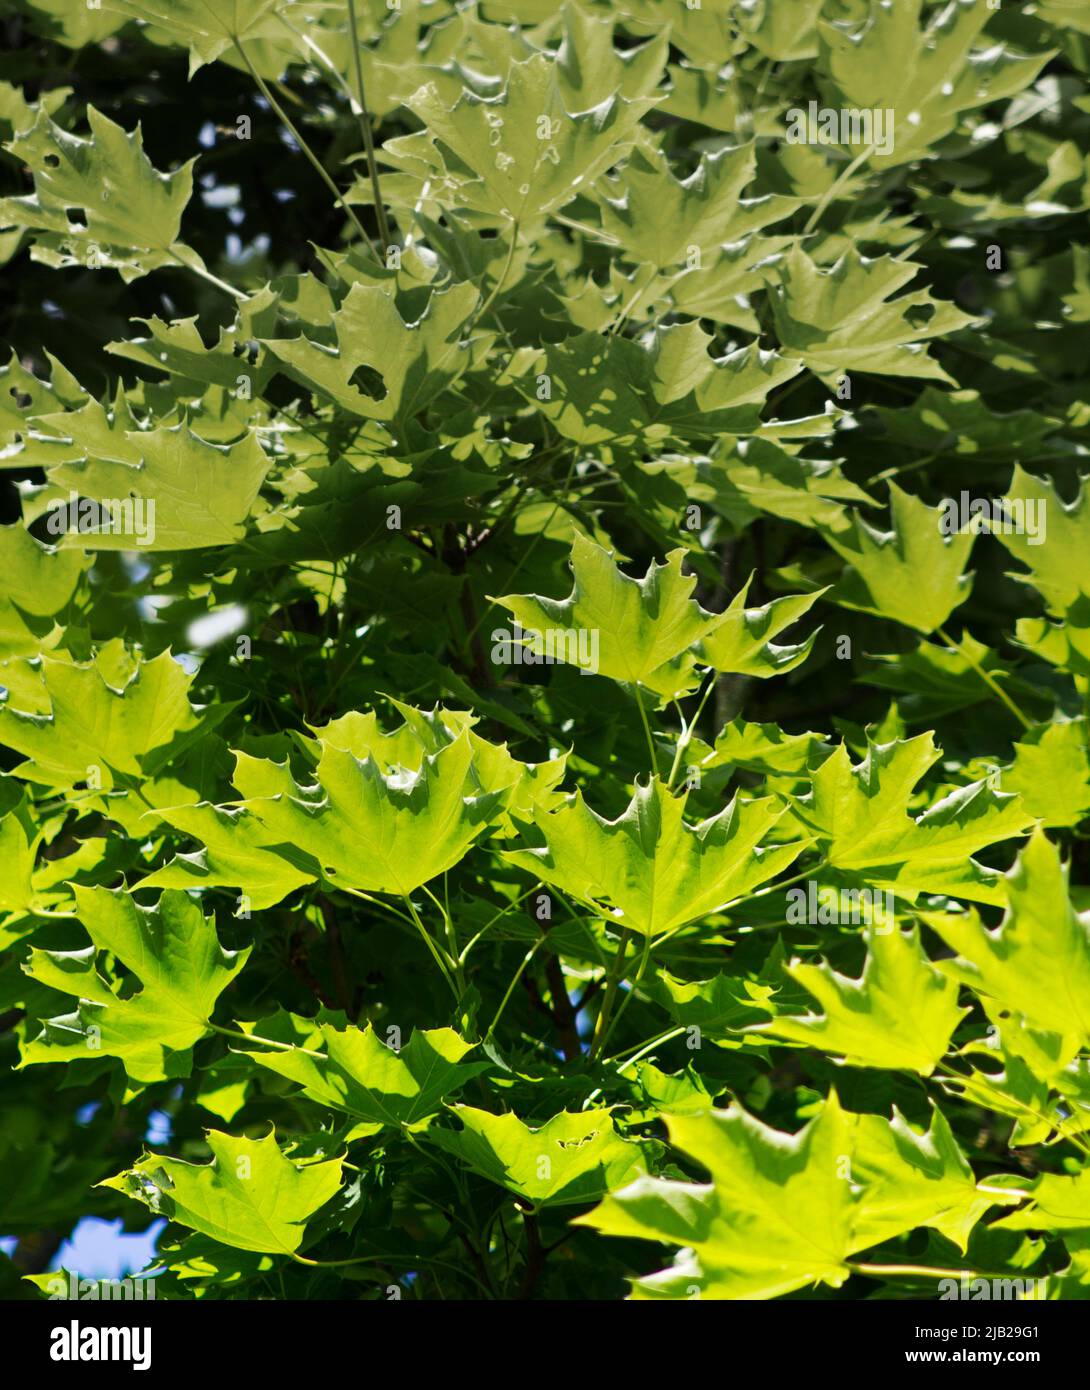 A close up of the crown of a mapletree during springtime Stock Photo